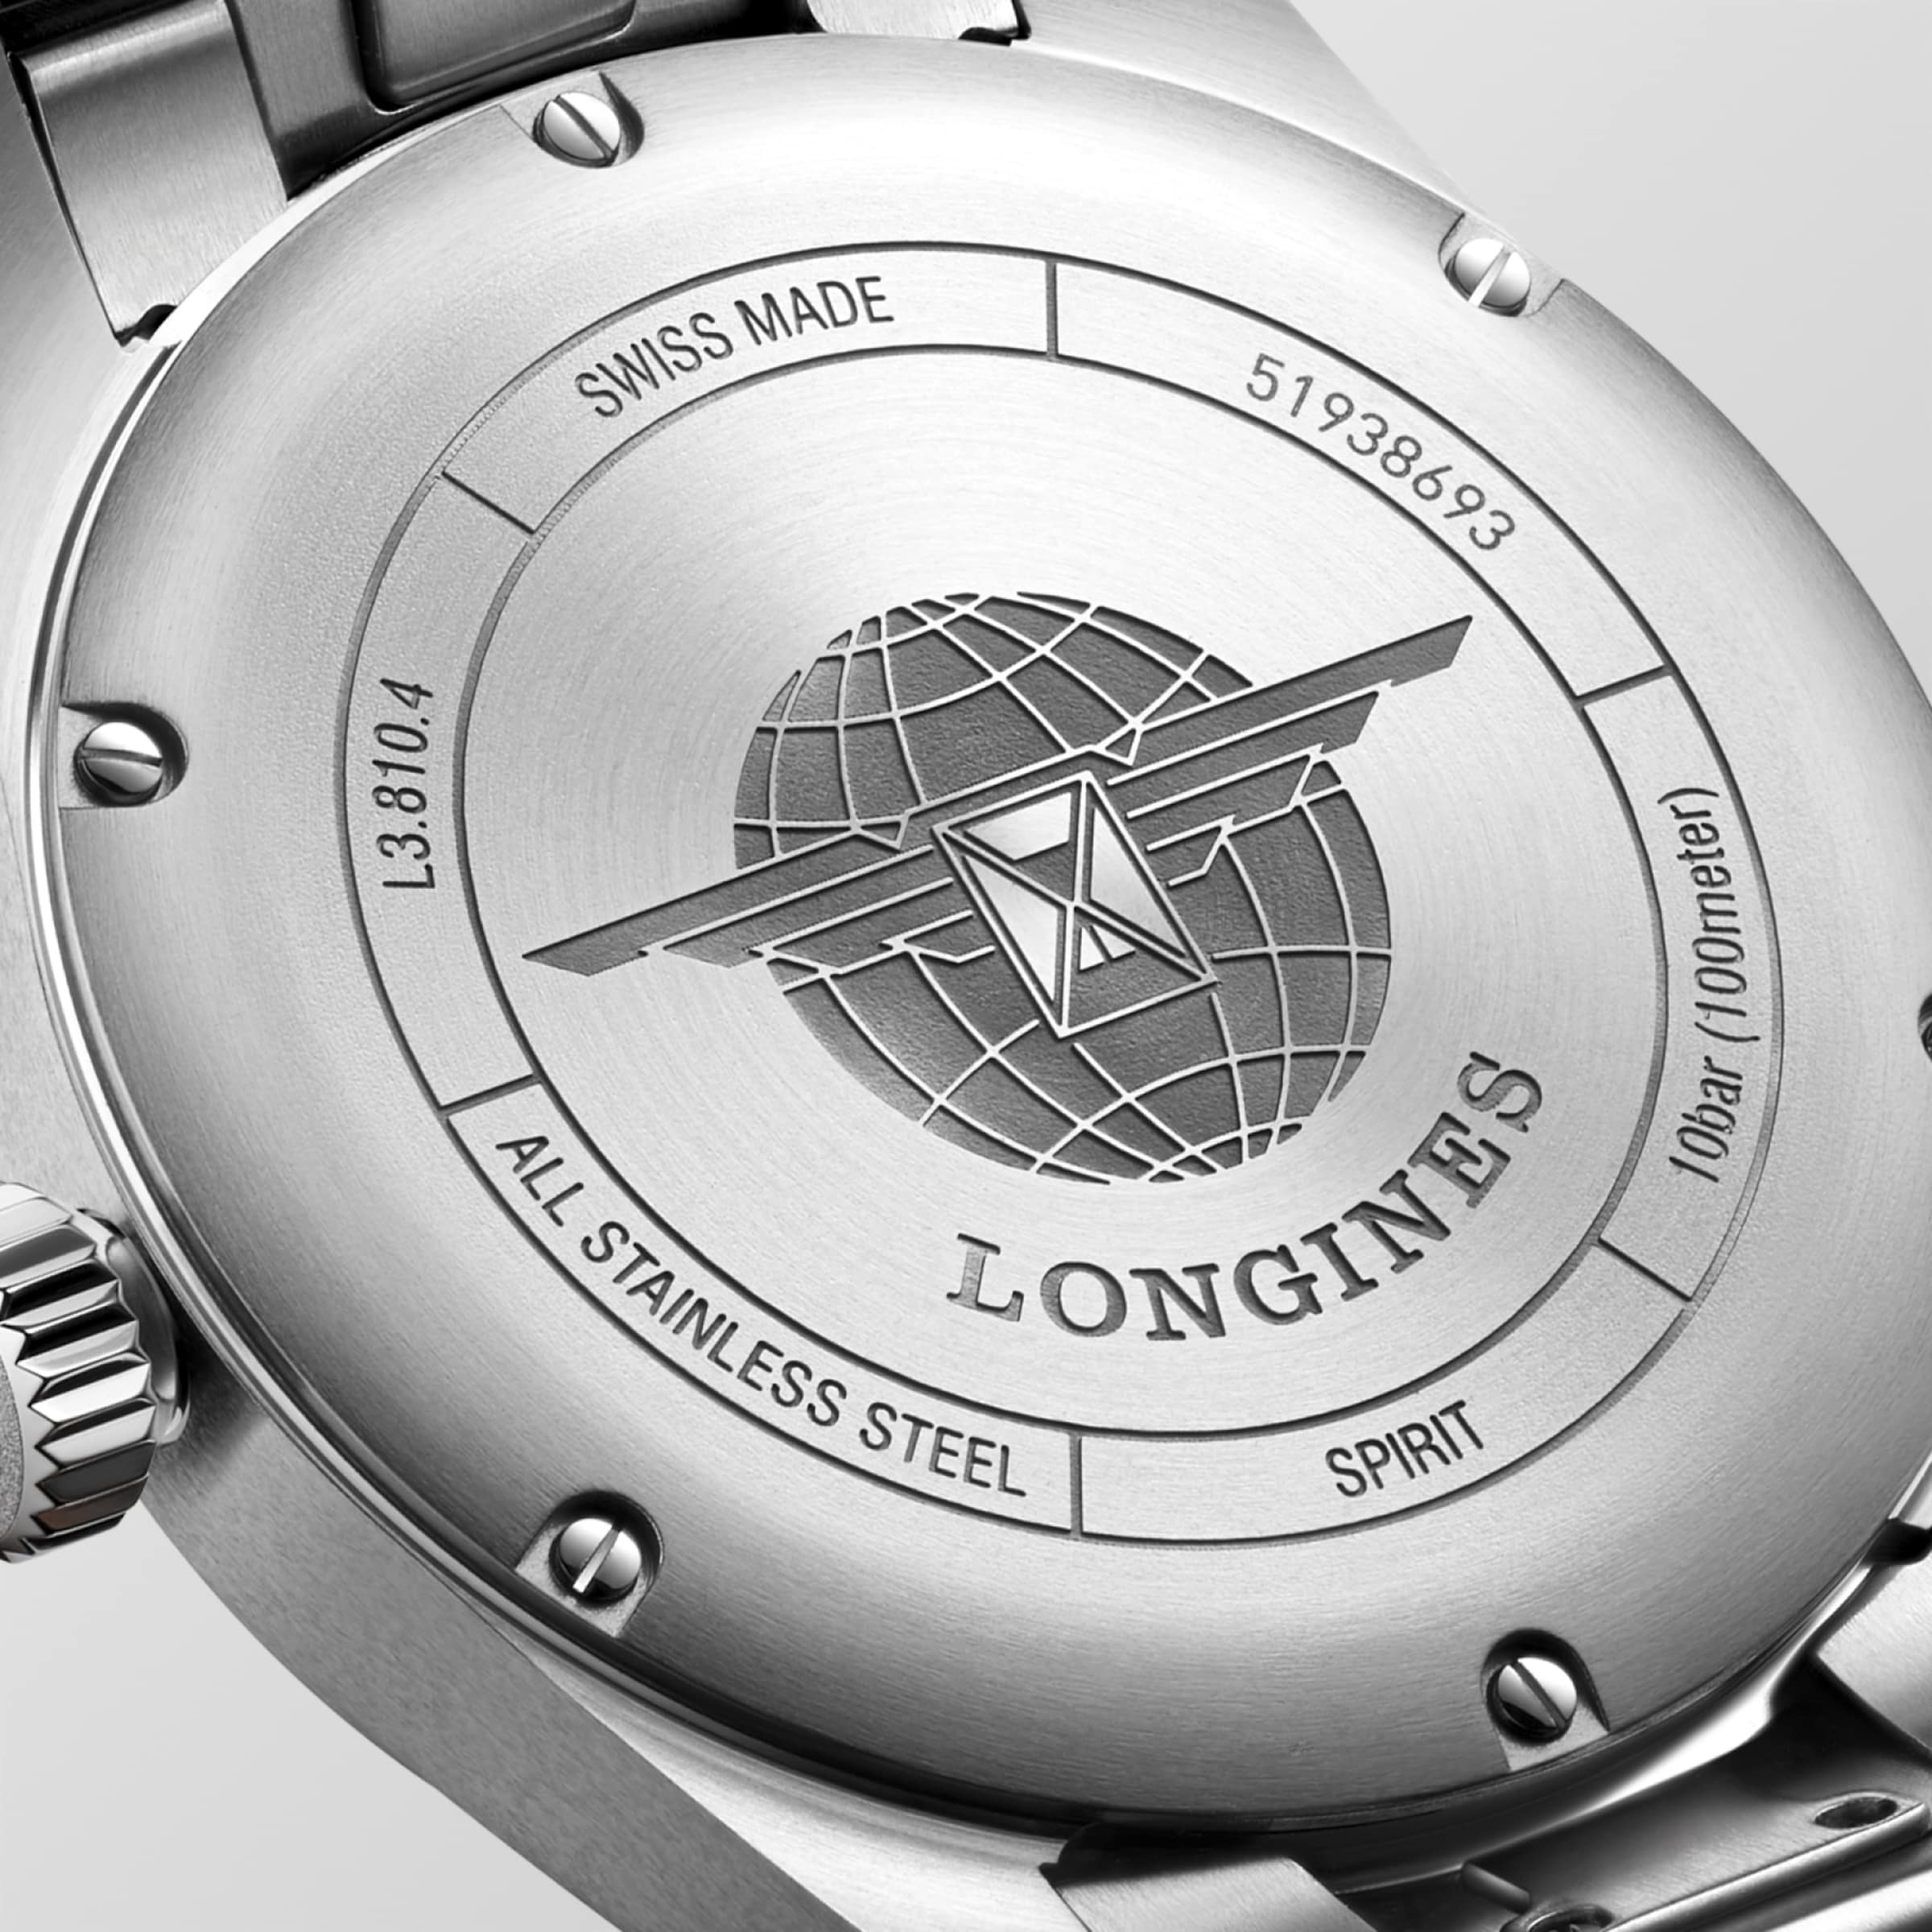 Longines SPIRIT Automatic Stainless steel Watch - L3.810.4.03.6